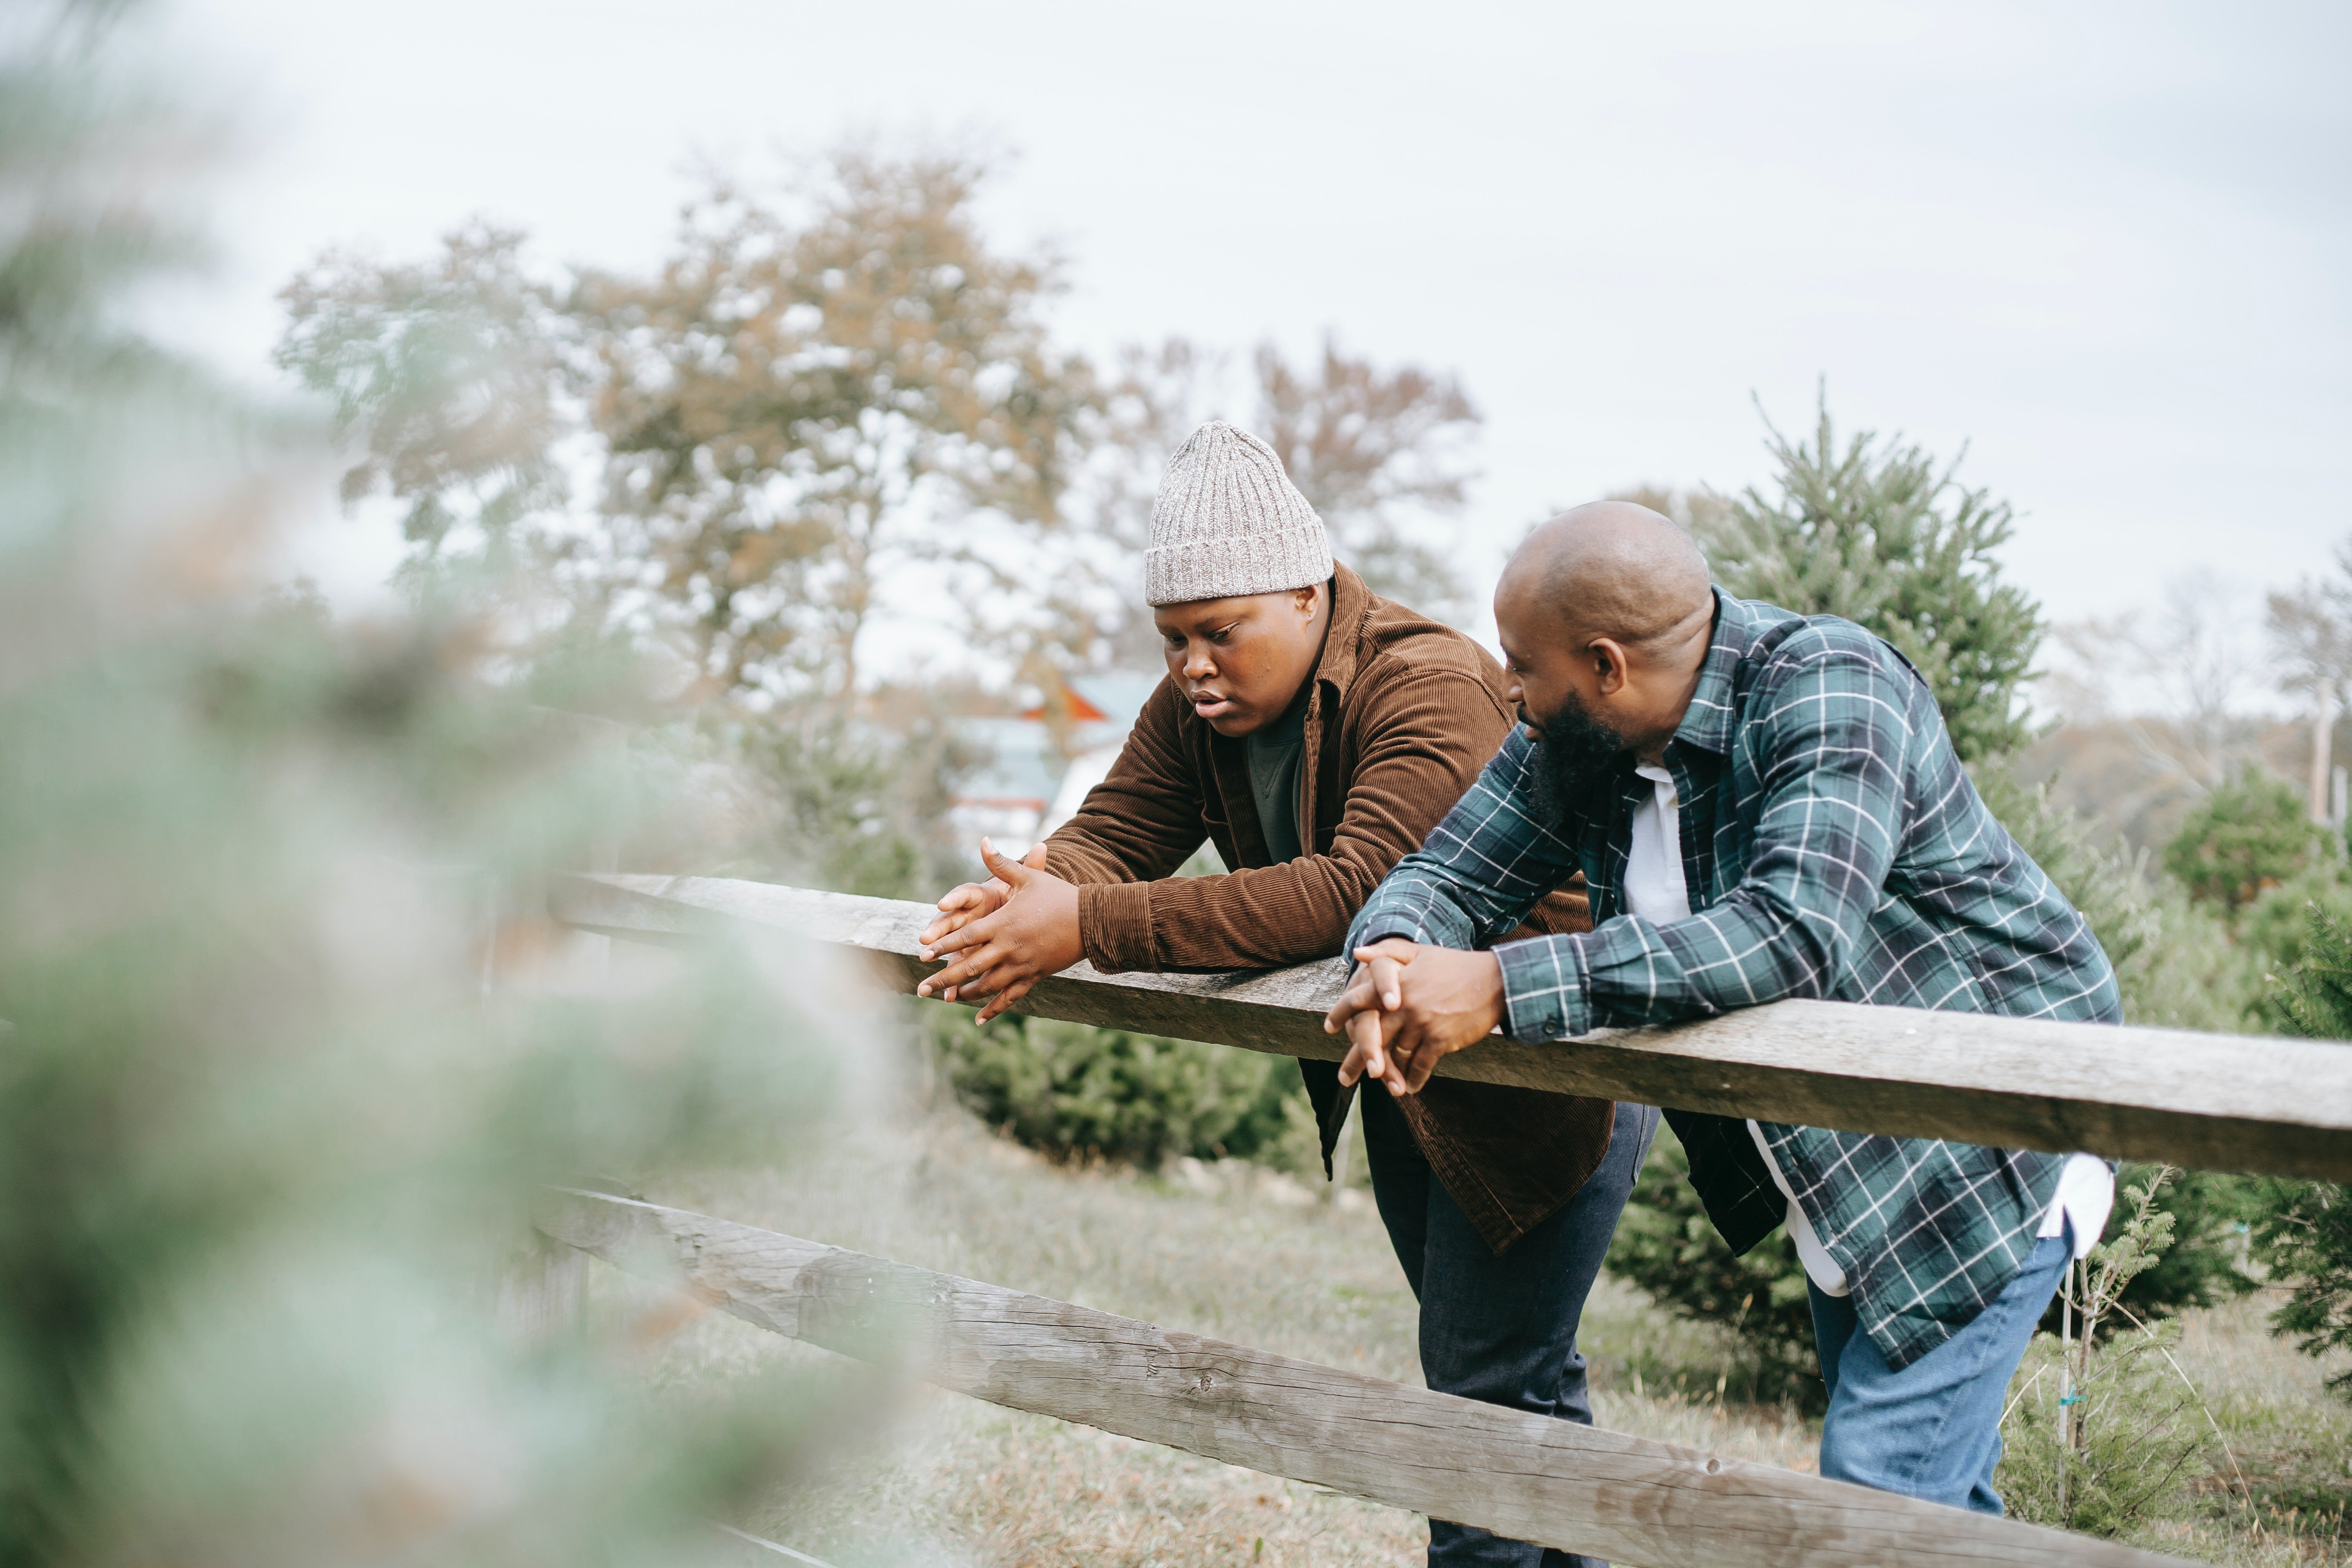 Black father conversing with teen near fence on farmland | Photo: Pexels